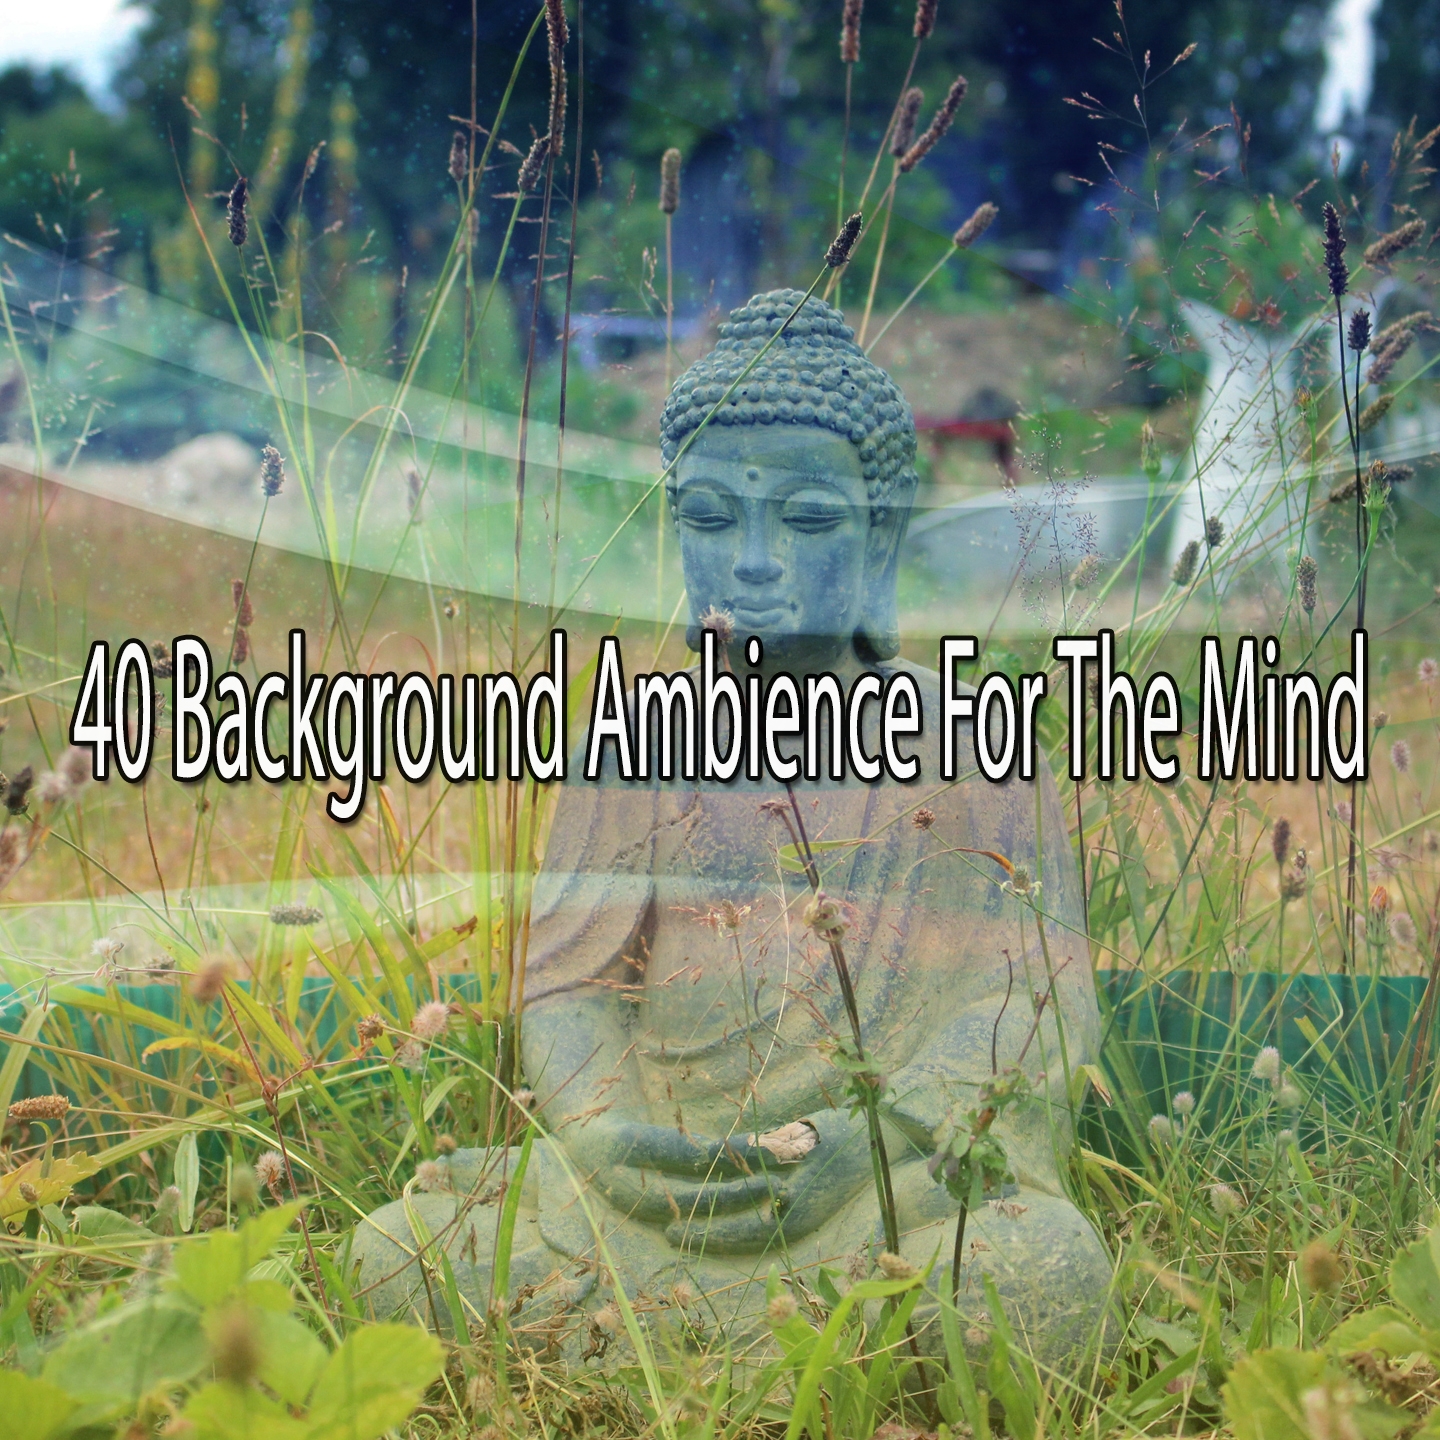 40 Background Ambience For The Mind